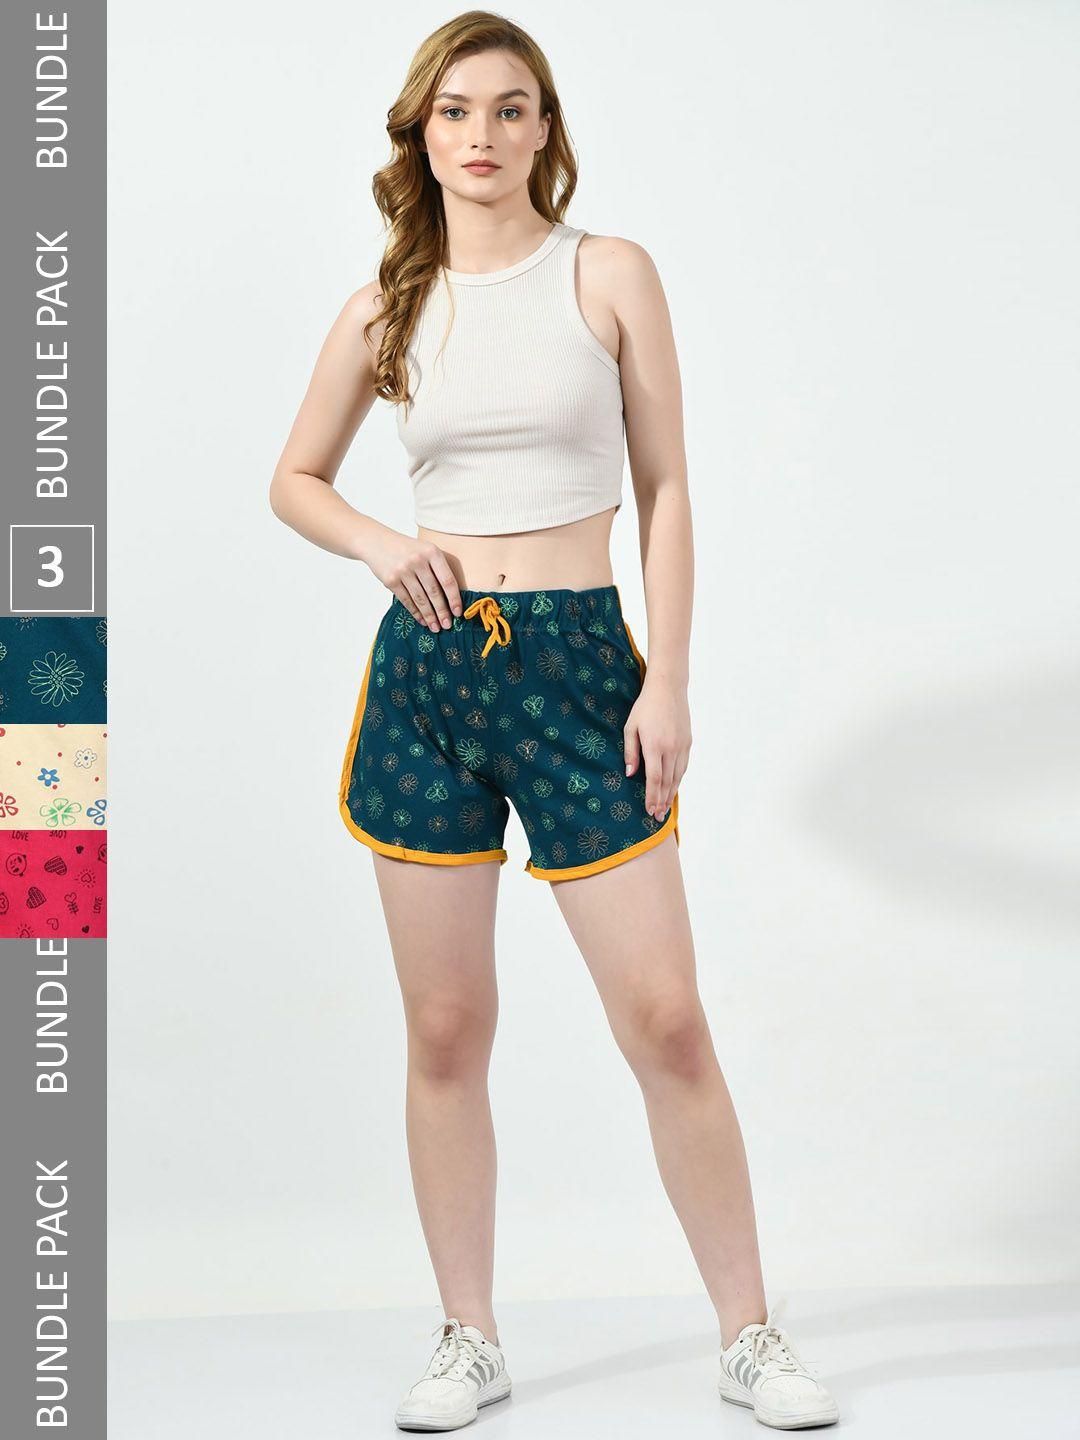 baesd pack of 3 printed pure cotton hot pants shorts